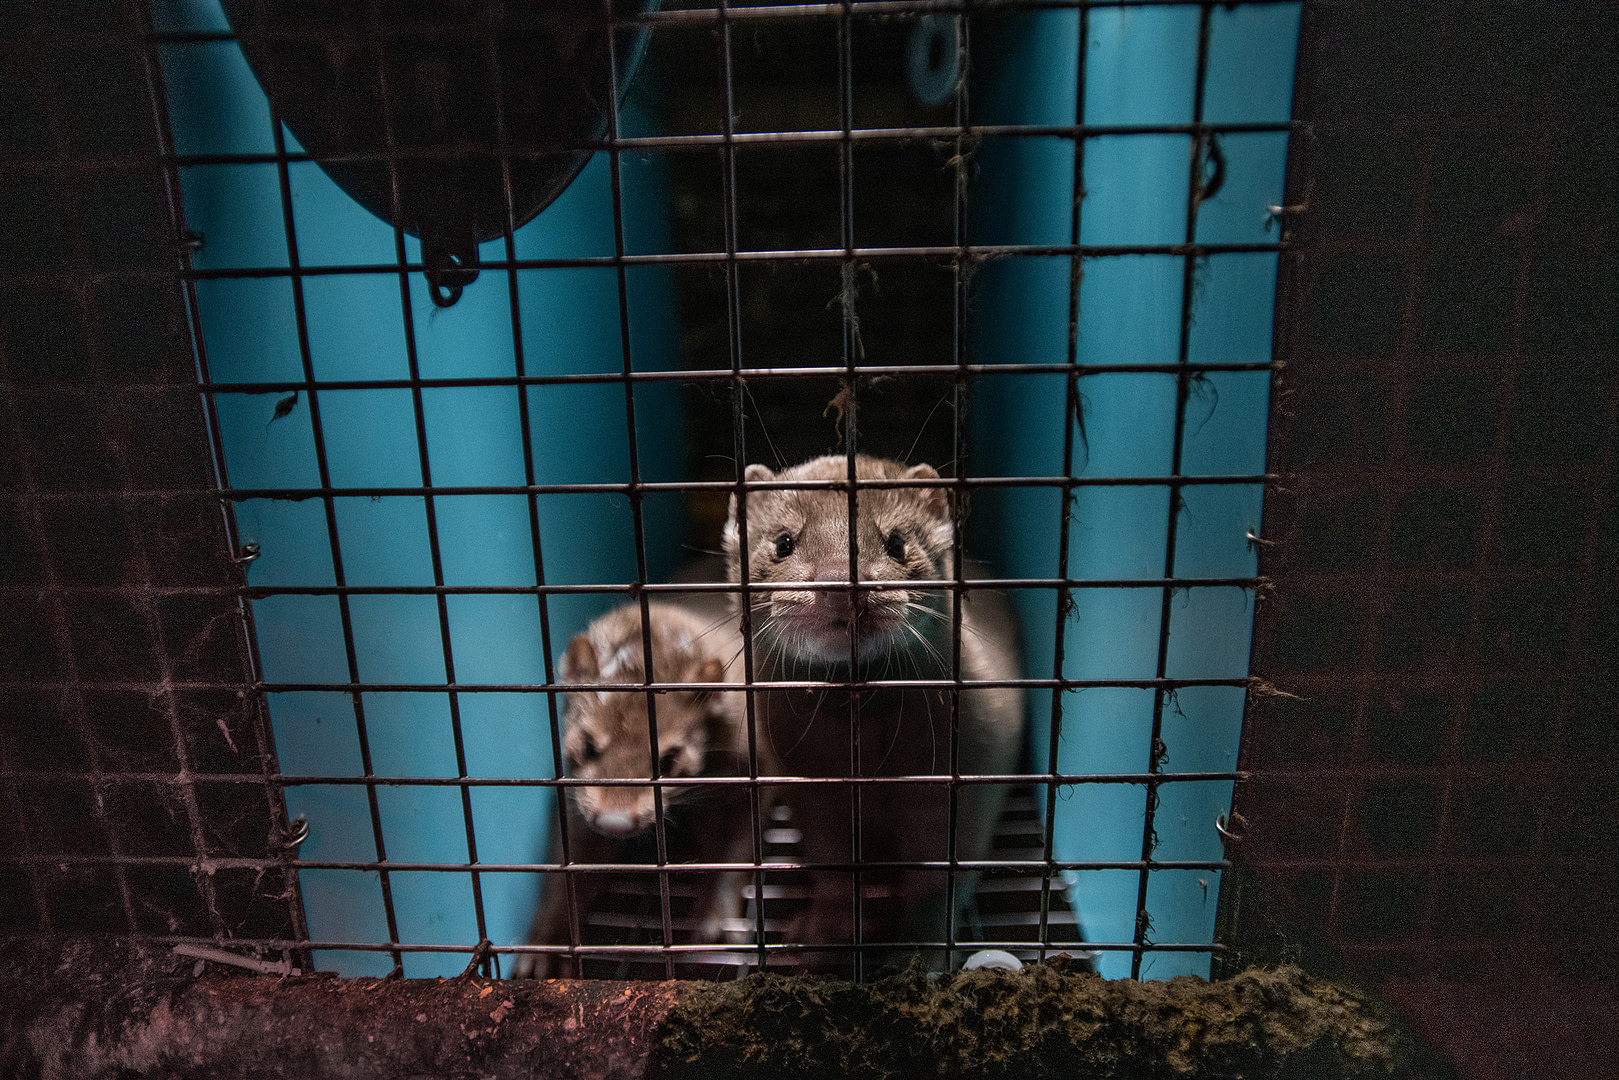 Two mink at a fur farm stare out through the wire mesh of a barren cage. Their tiny enclosure contains no nest or bedding. Quebec, Canada, 2022. We Animals Media